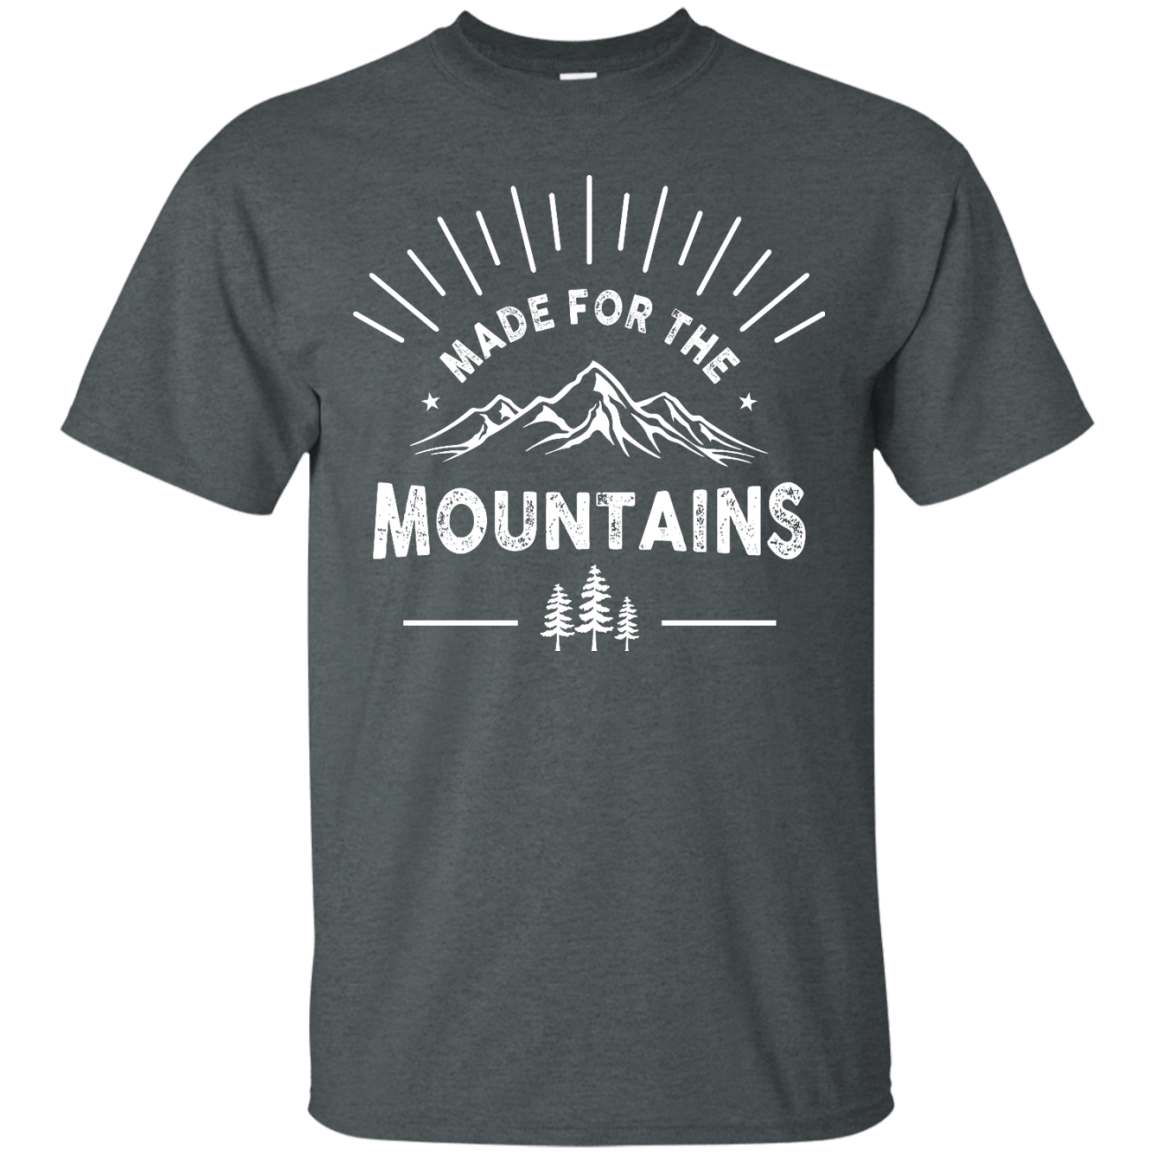 Made For The Mountains Tees - Powderaddicts